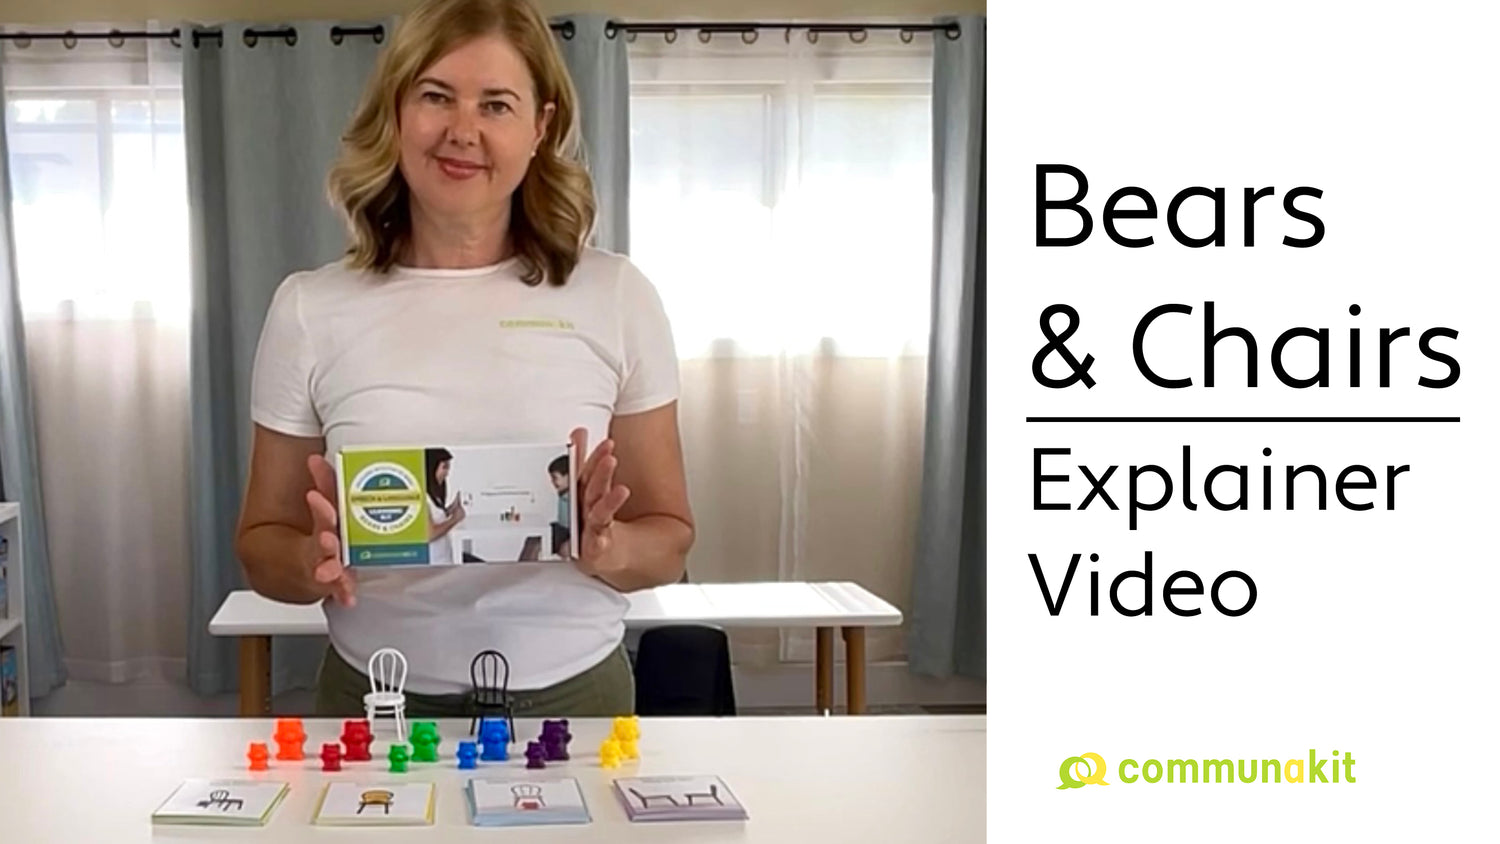 Connie talks in detail about the items in the Touch & Talk kit.  She shows you all 41 items and how they can be used to build vocabulary! And no virtual tour of the kits would be complete without talking about our secret sauce, the picture cards!